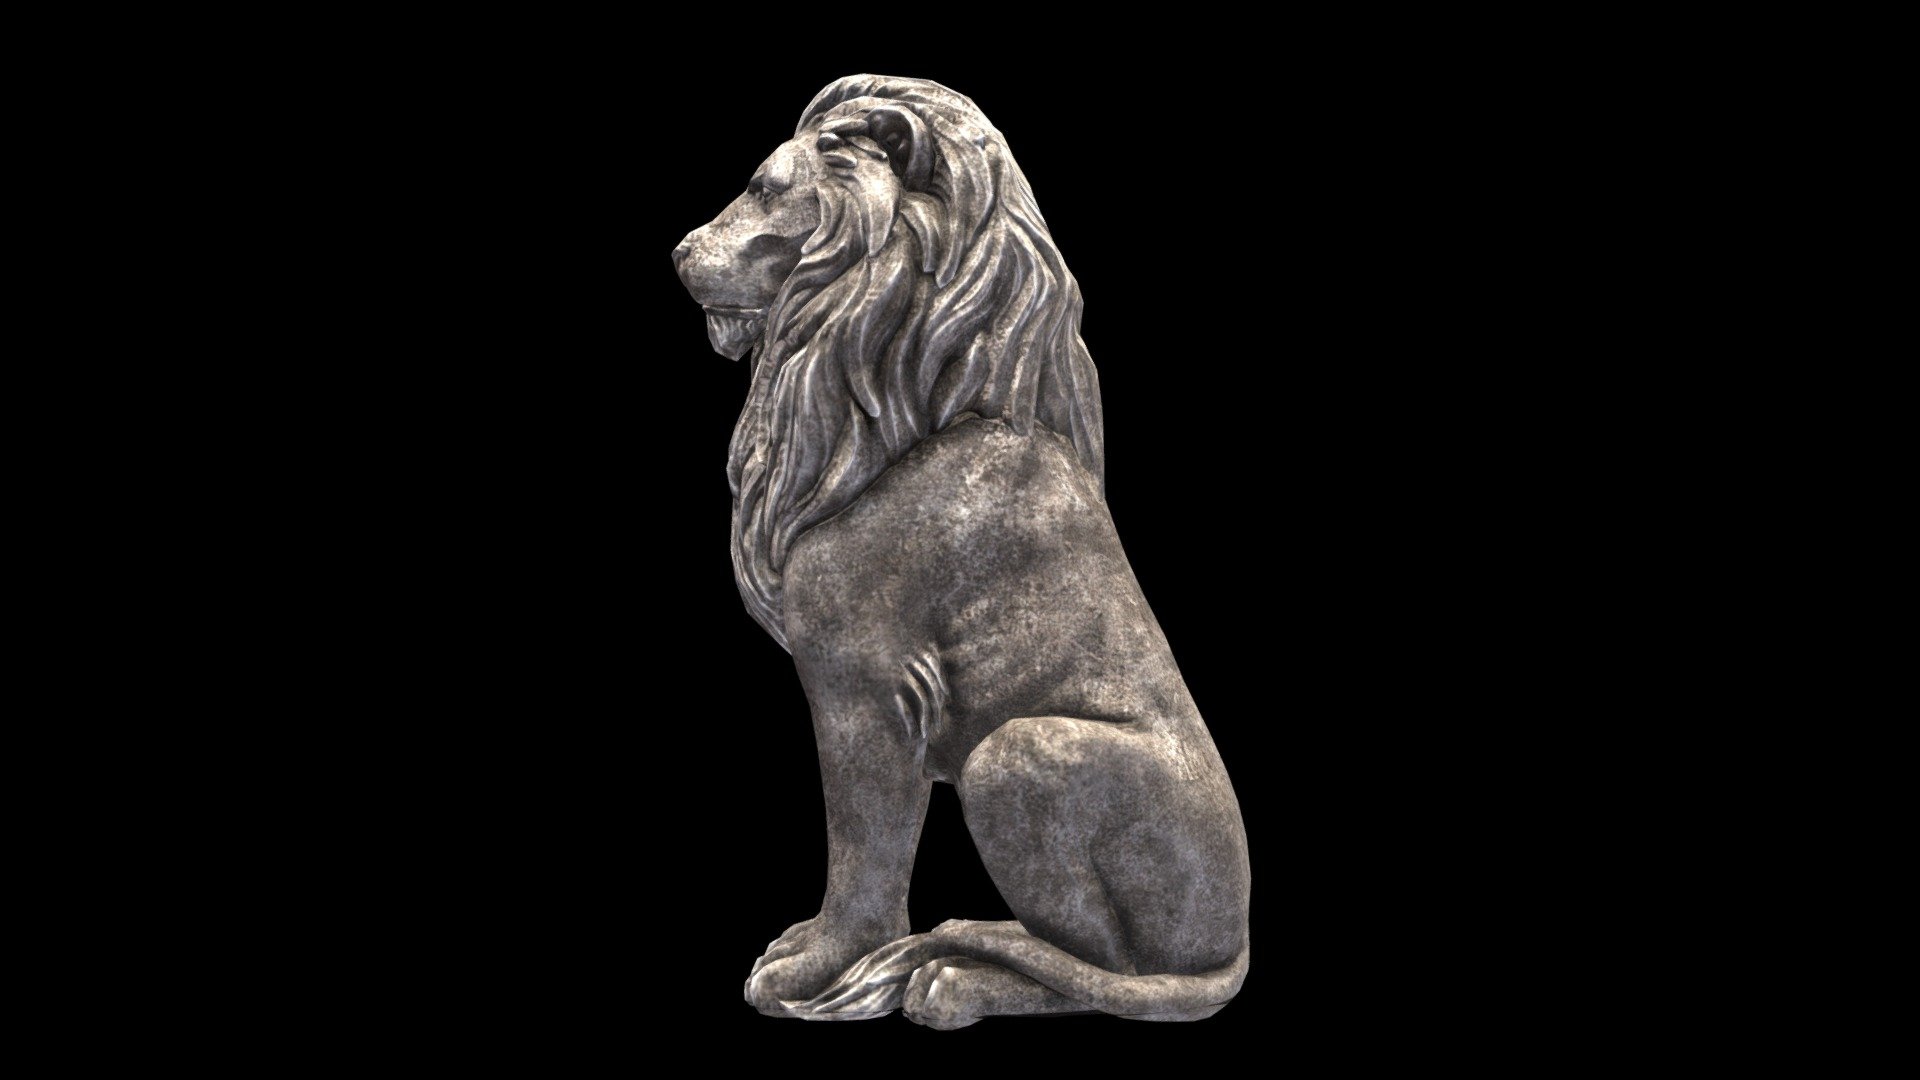 Lion Statue Sculpted and converted into lowpoly 3d model
in fbx file format - Lion Statue - Buy Royalty Free 3D model by Robin Art FX (@robinsonartfx) 3d model